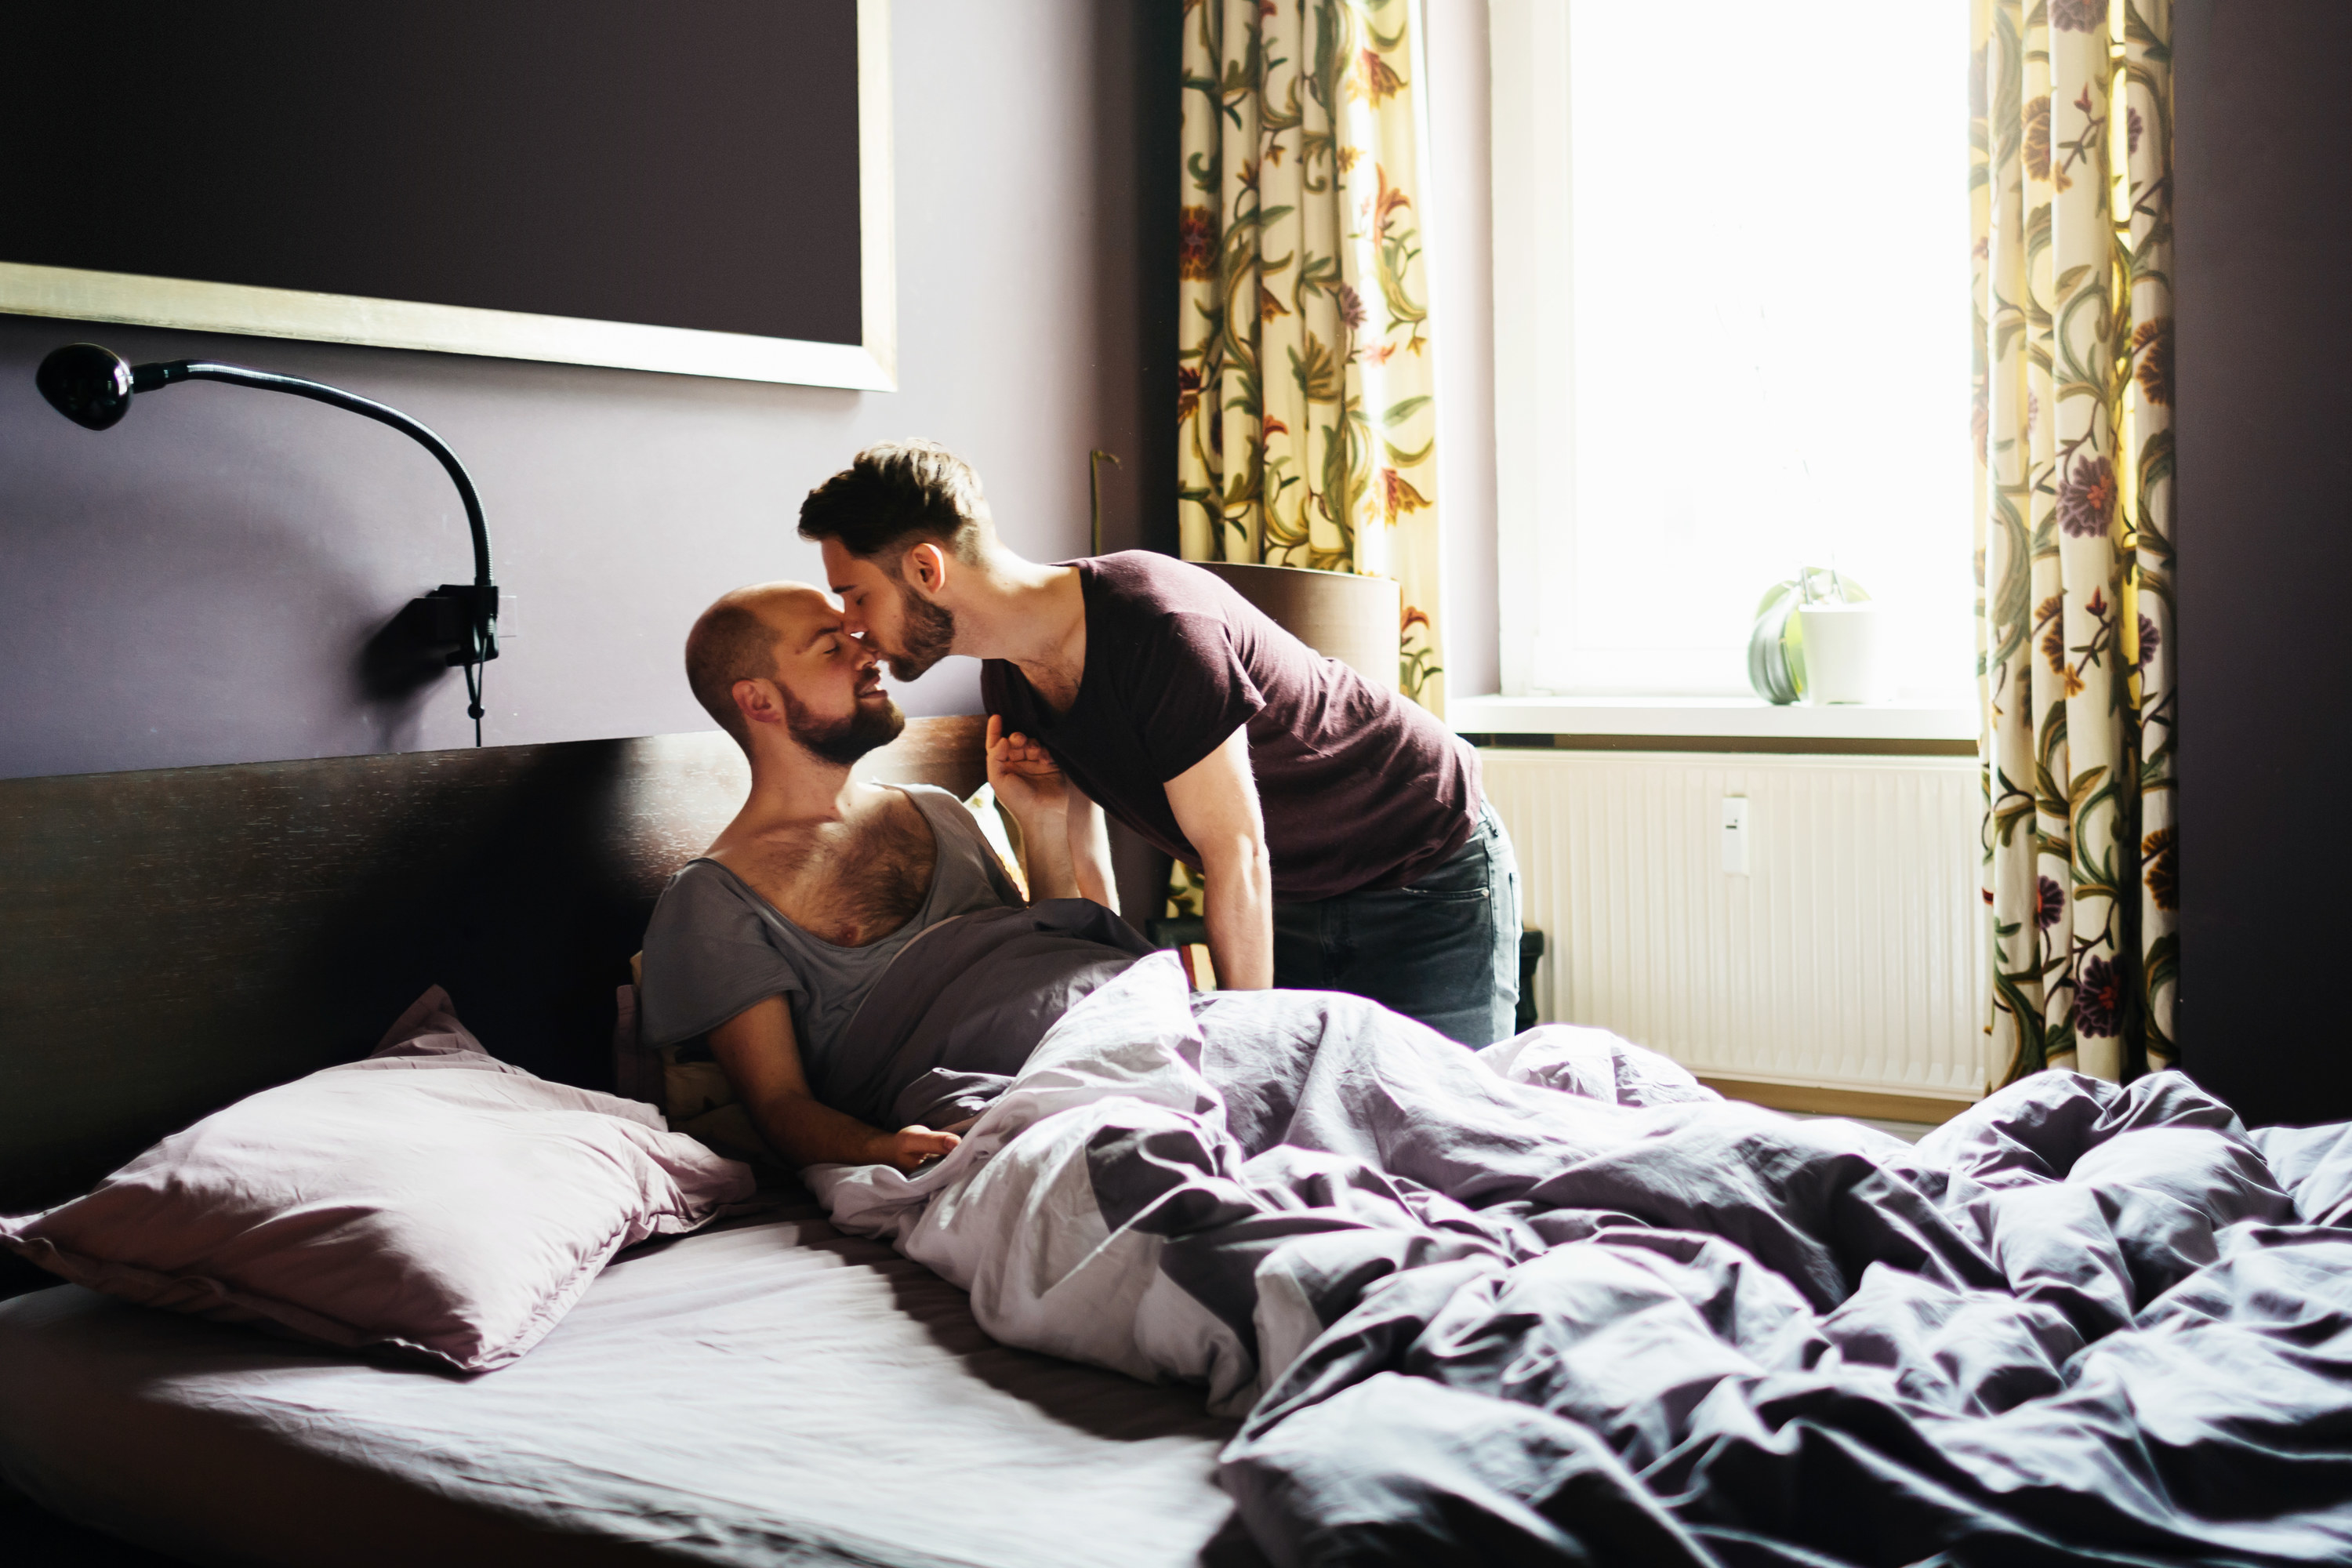 A partner kissing their partner on the nose in bed